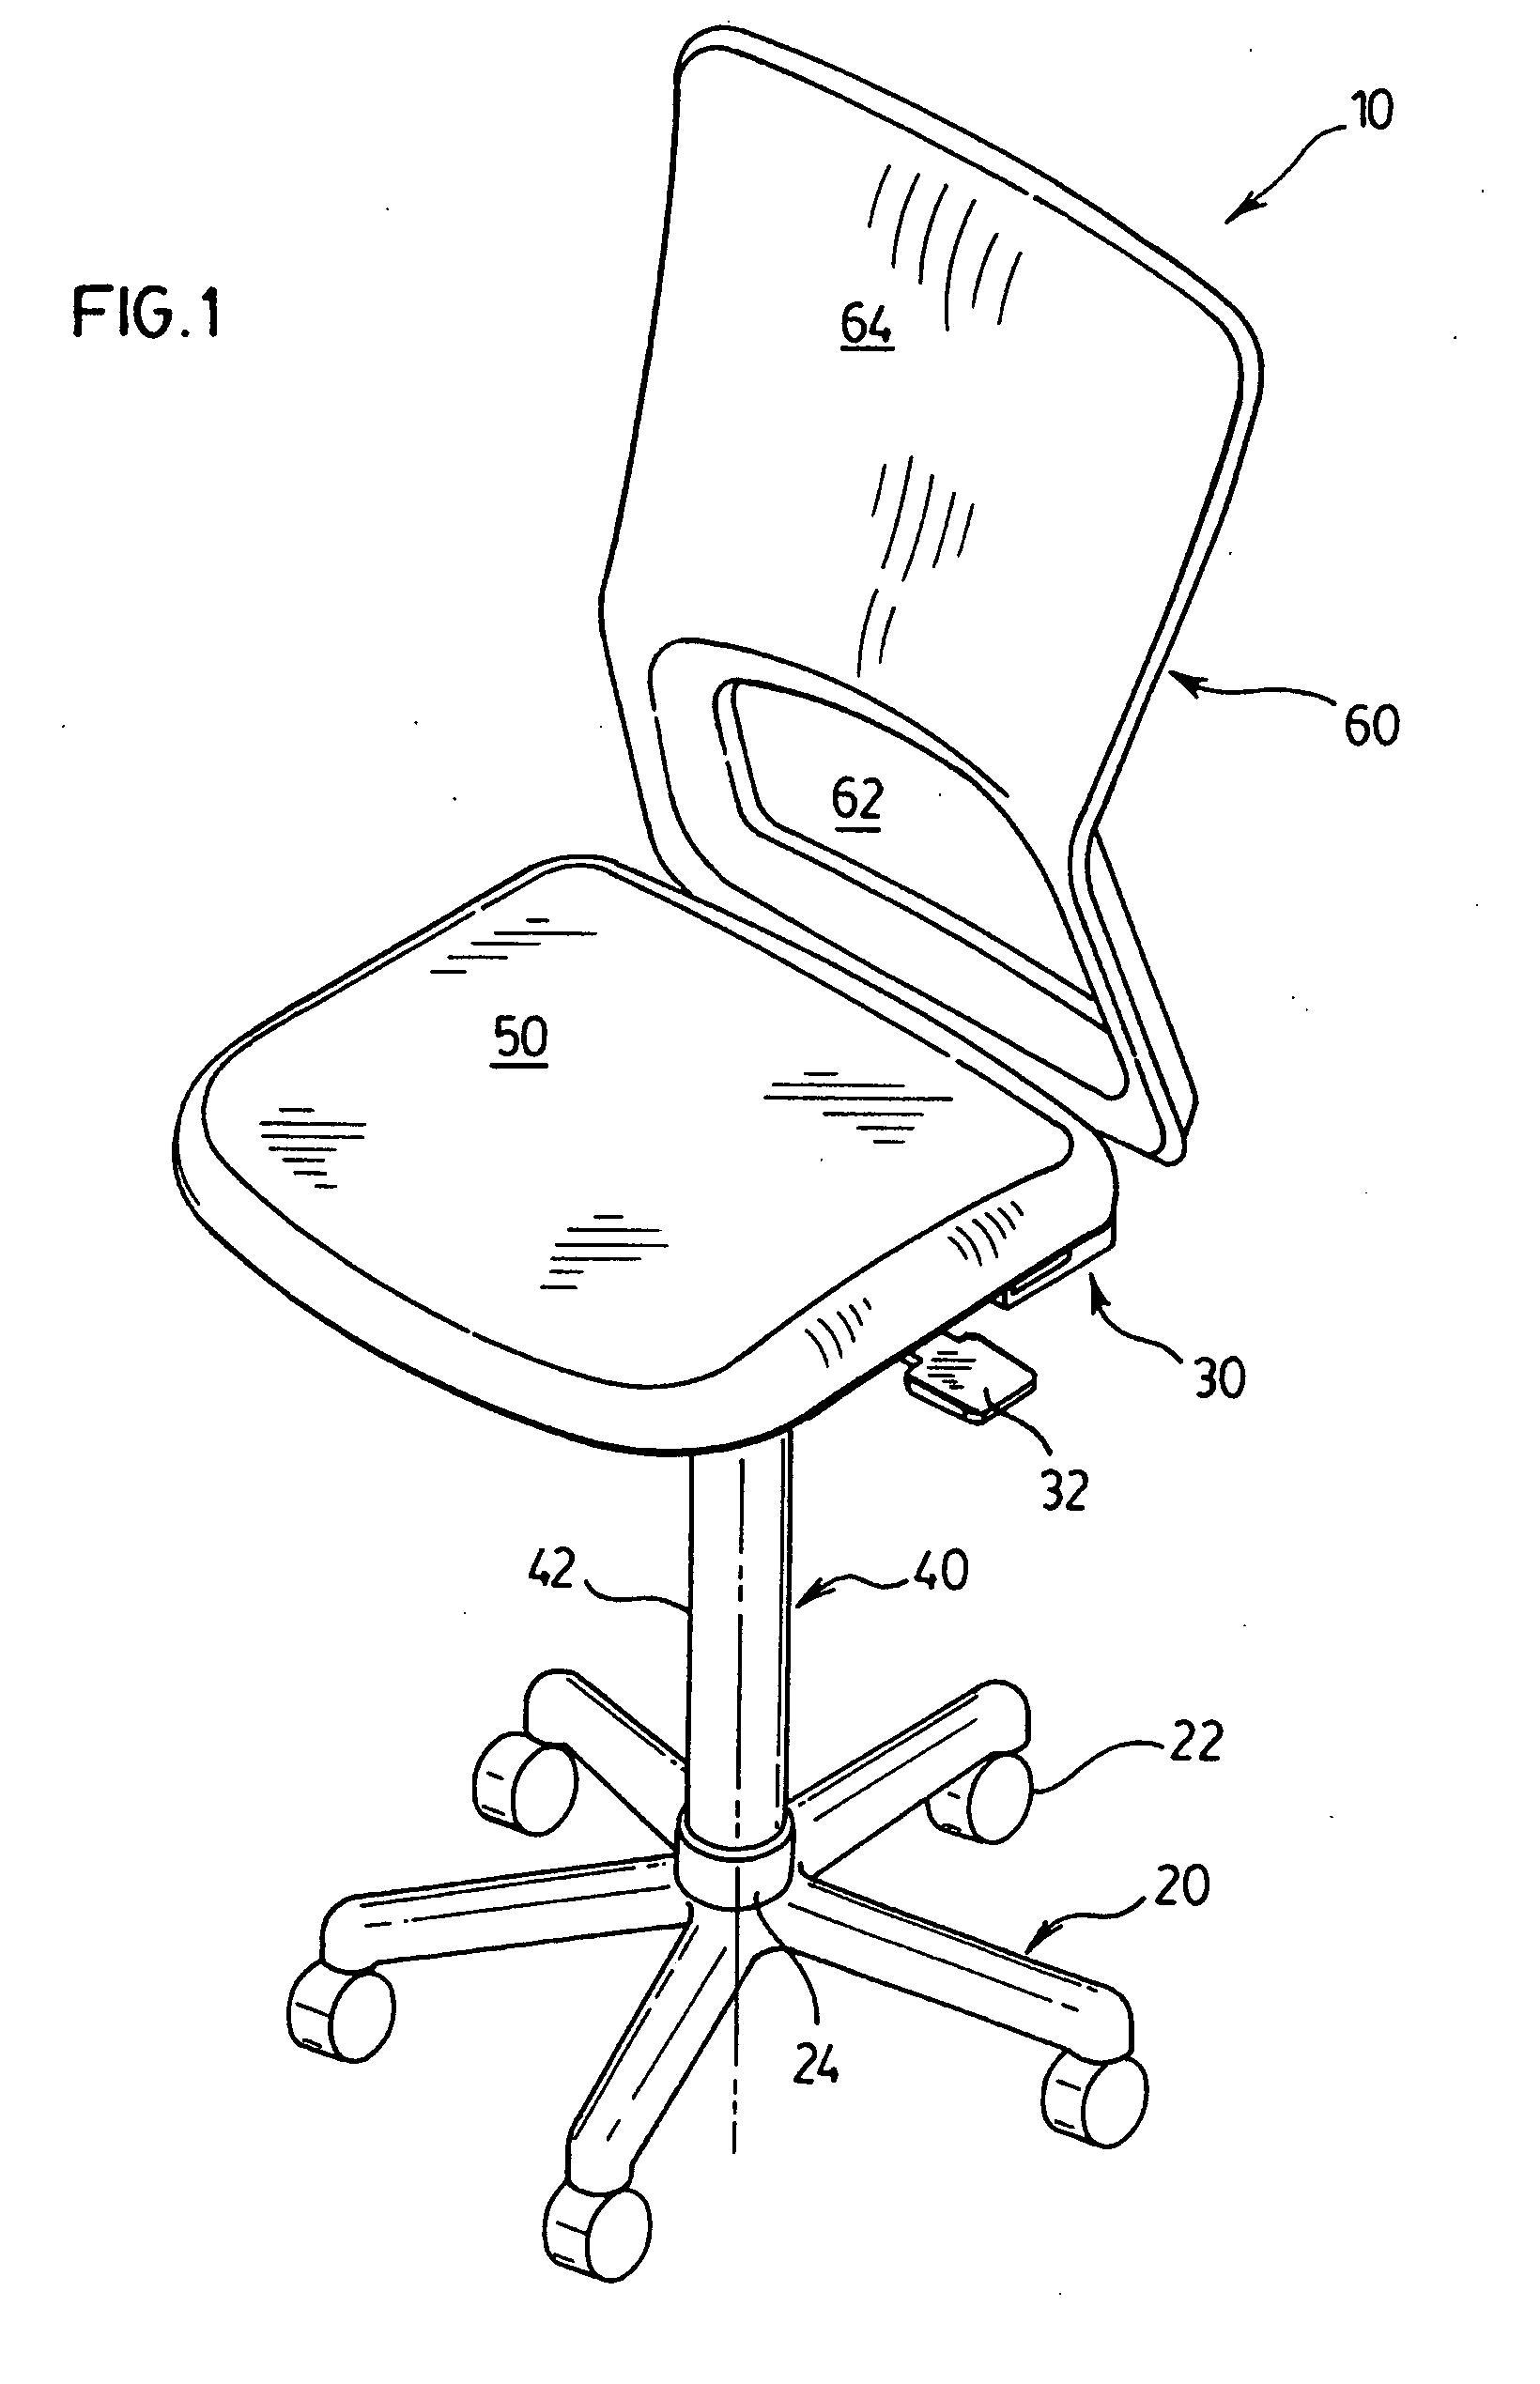 Tiltable chair accommodating male and female user seating position preferences